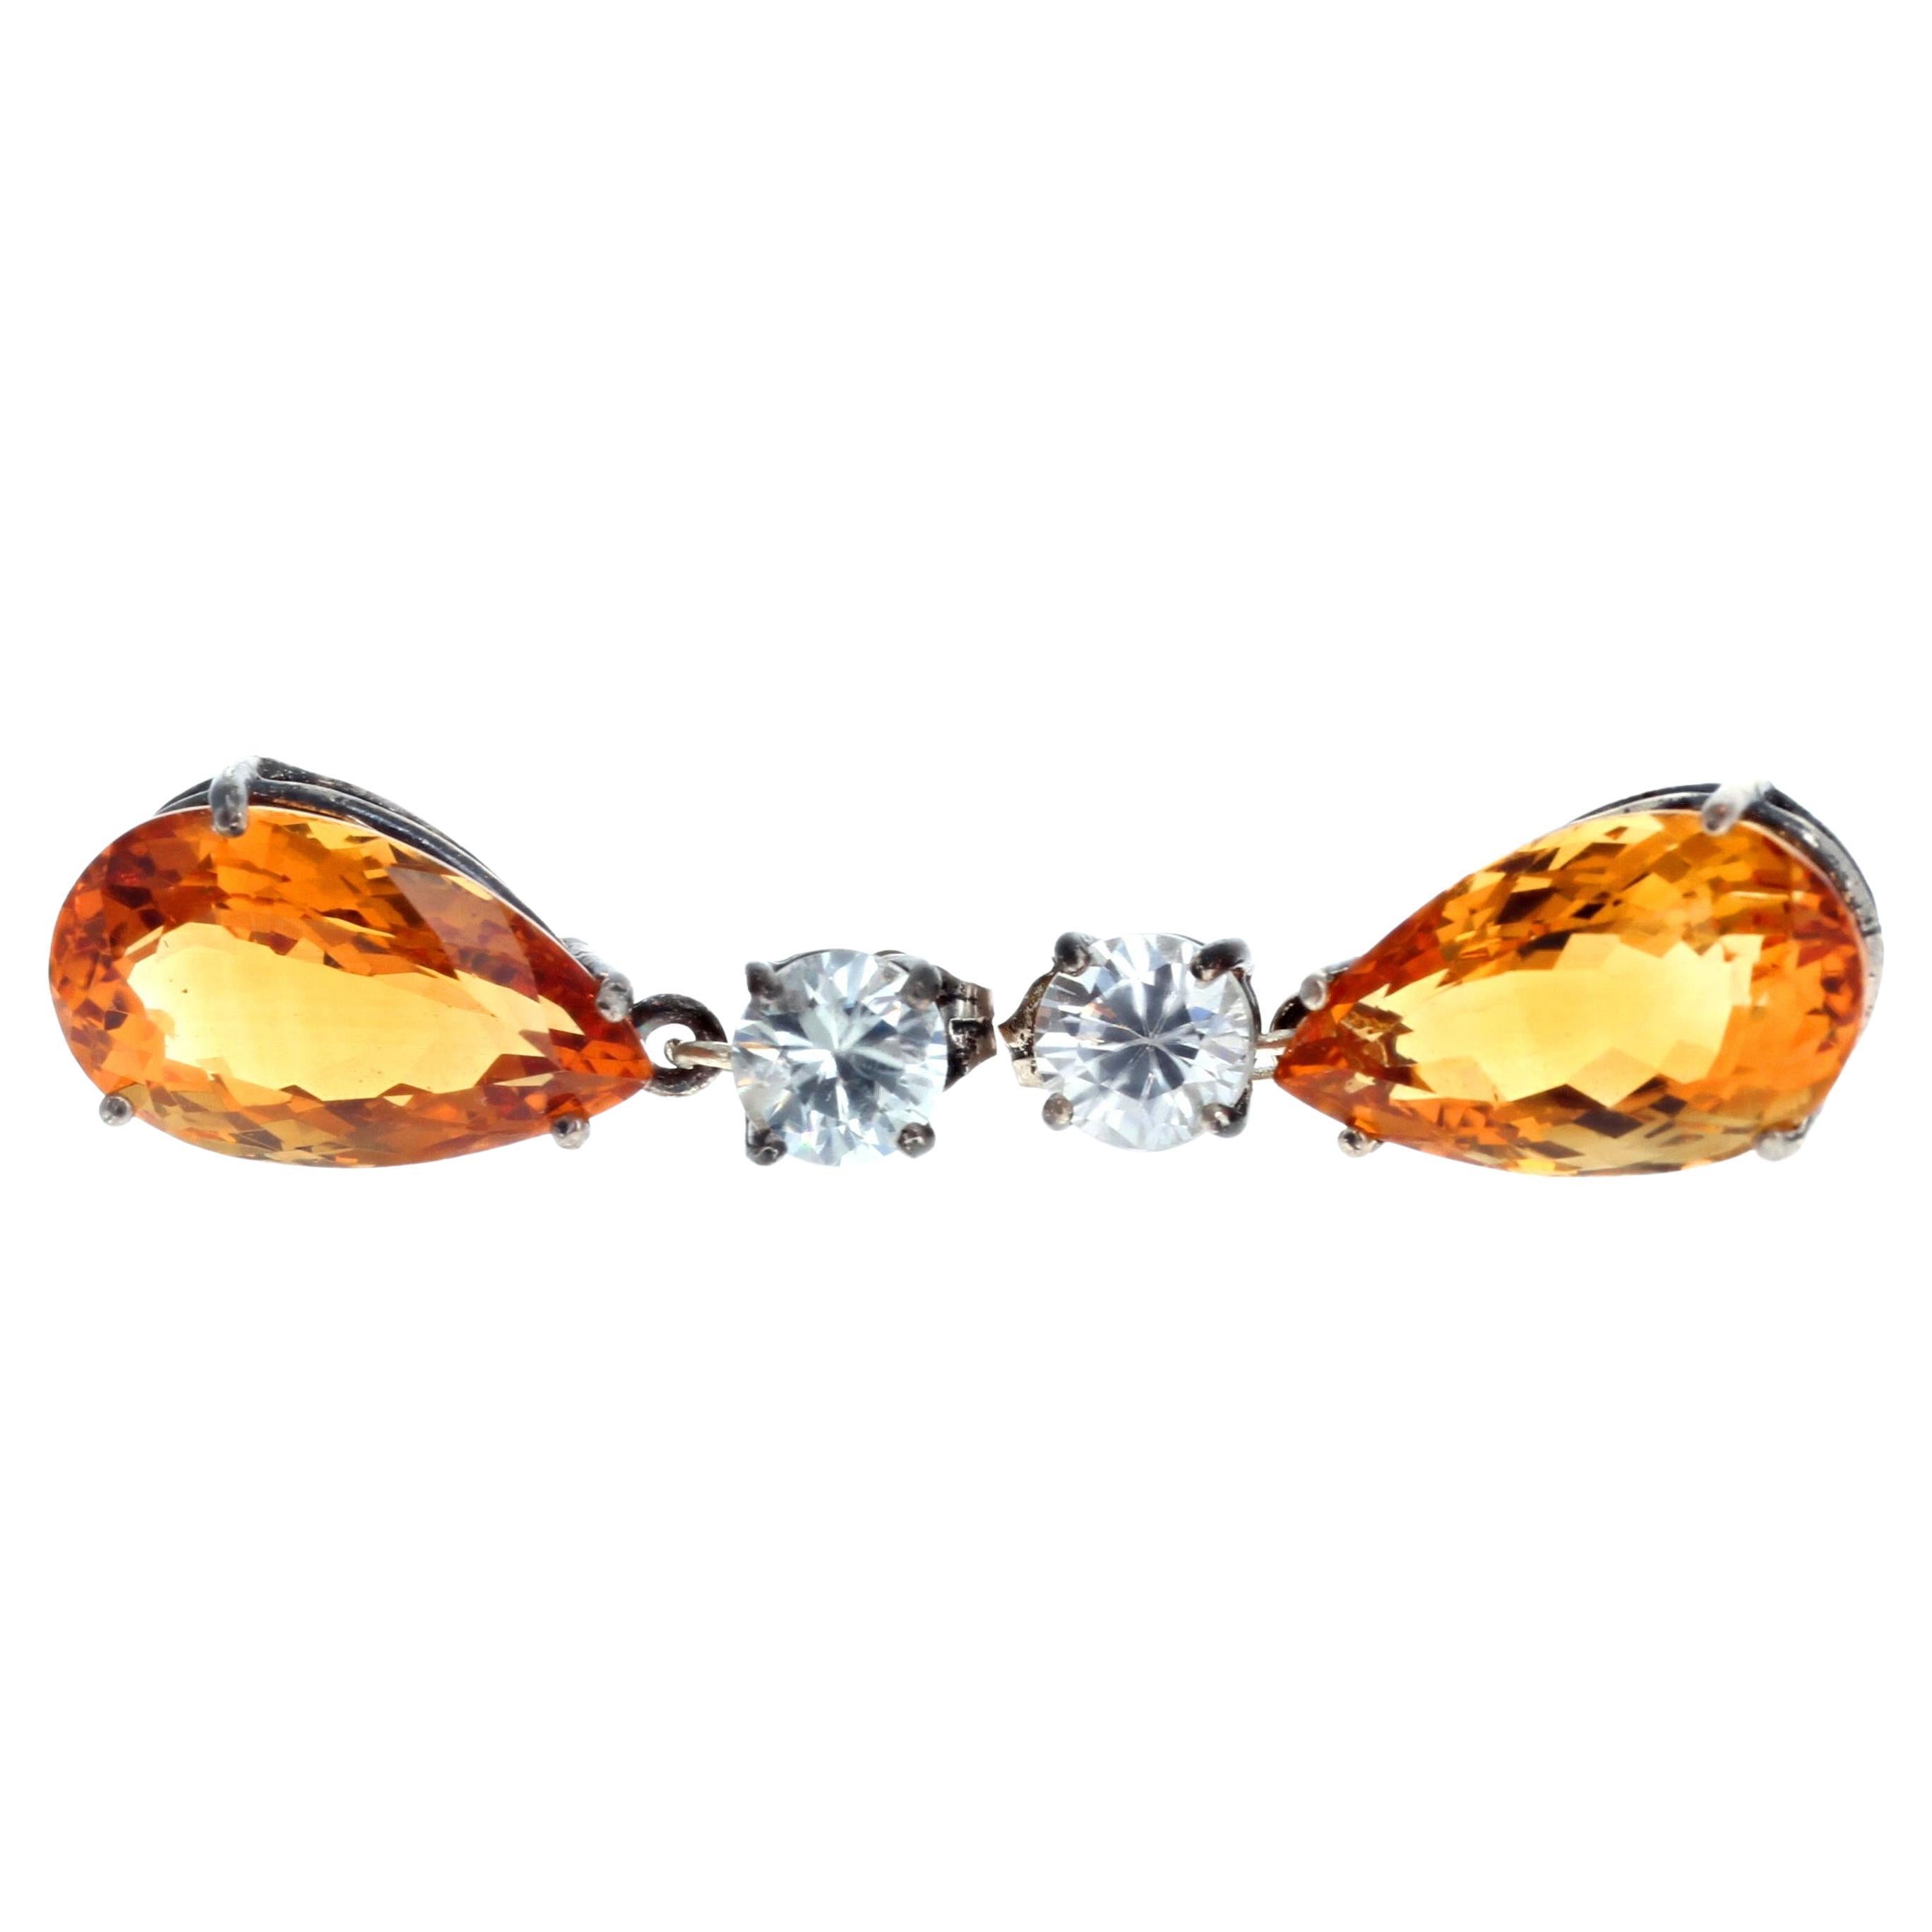 AJD Beautiful Glittering Citrine and Natural White Zircon Earrings